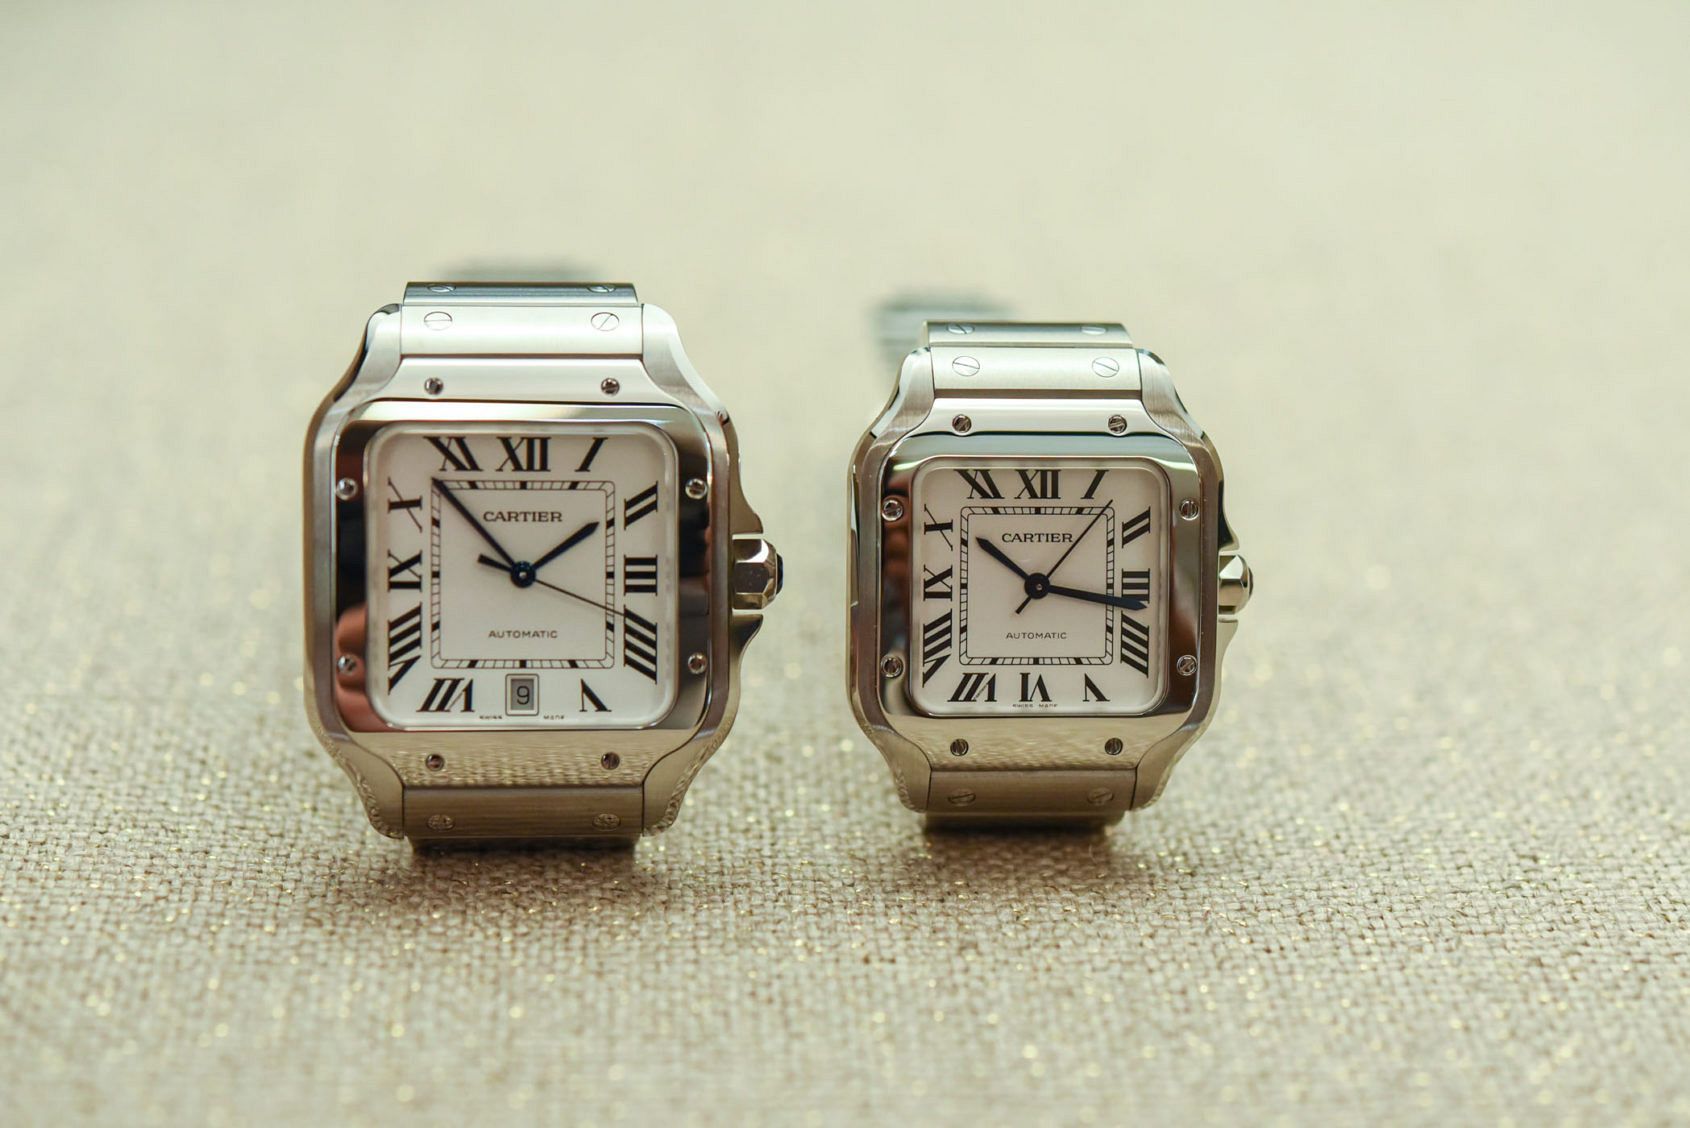 Larger Watches